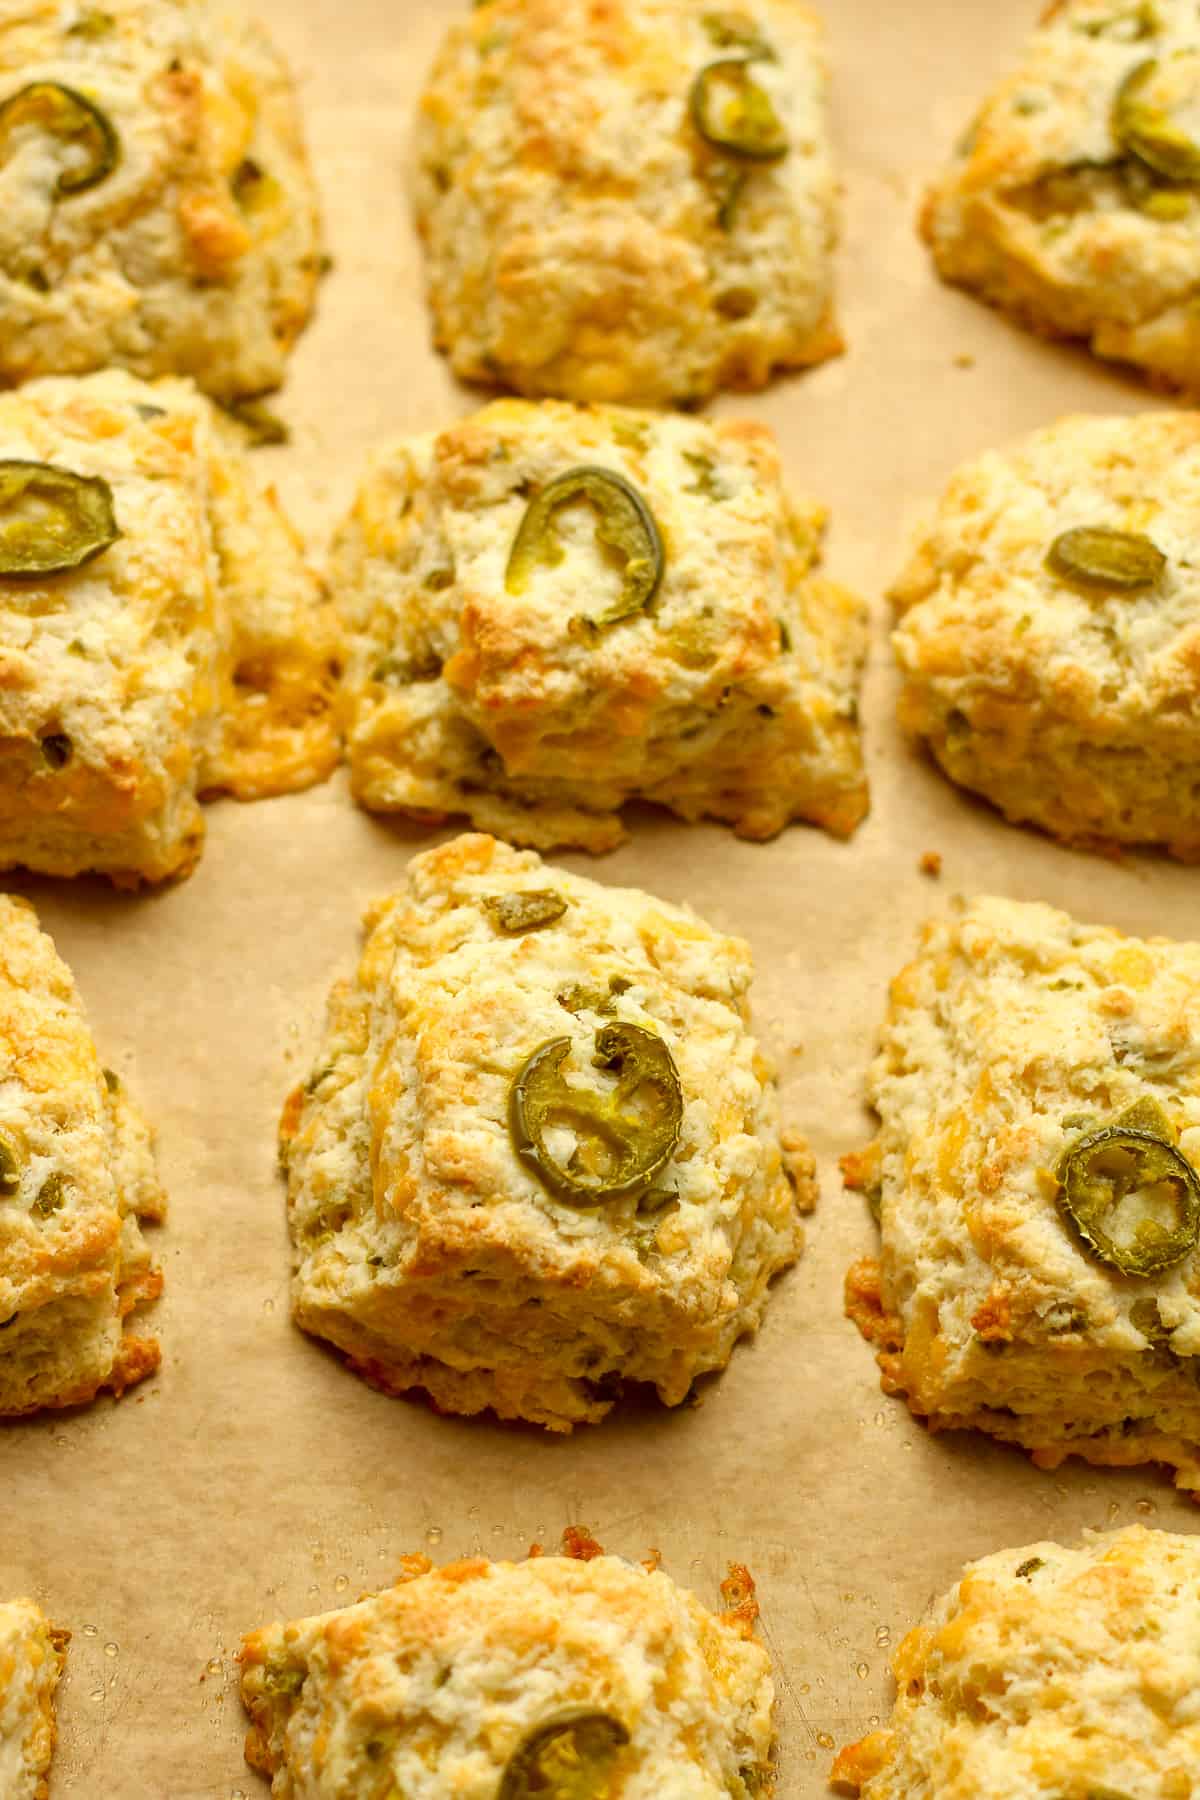 A pan of 12 jalapeno cheddar biscuits.